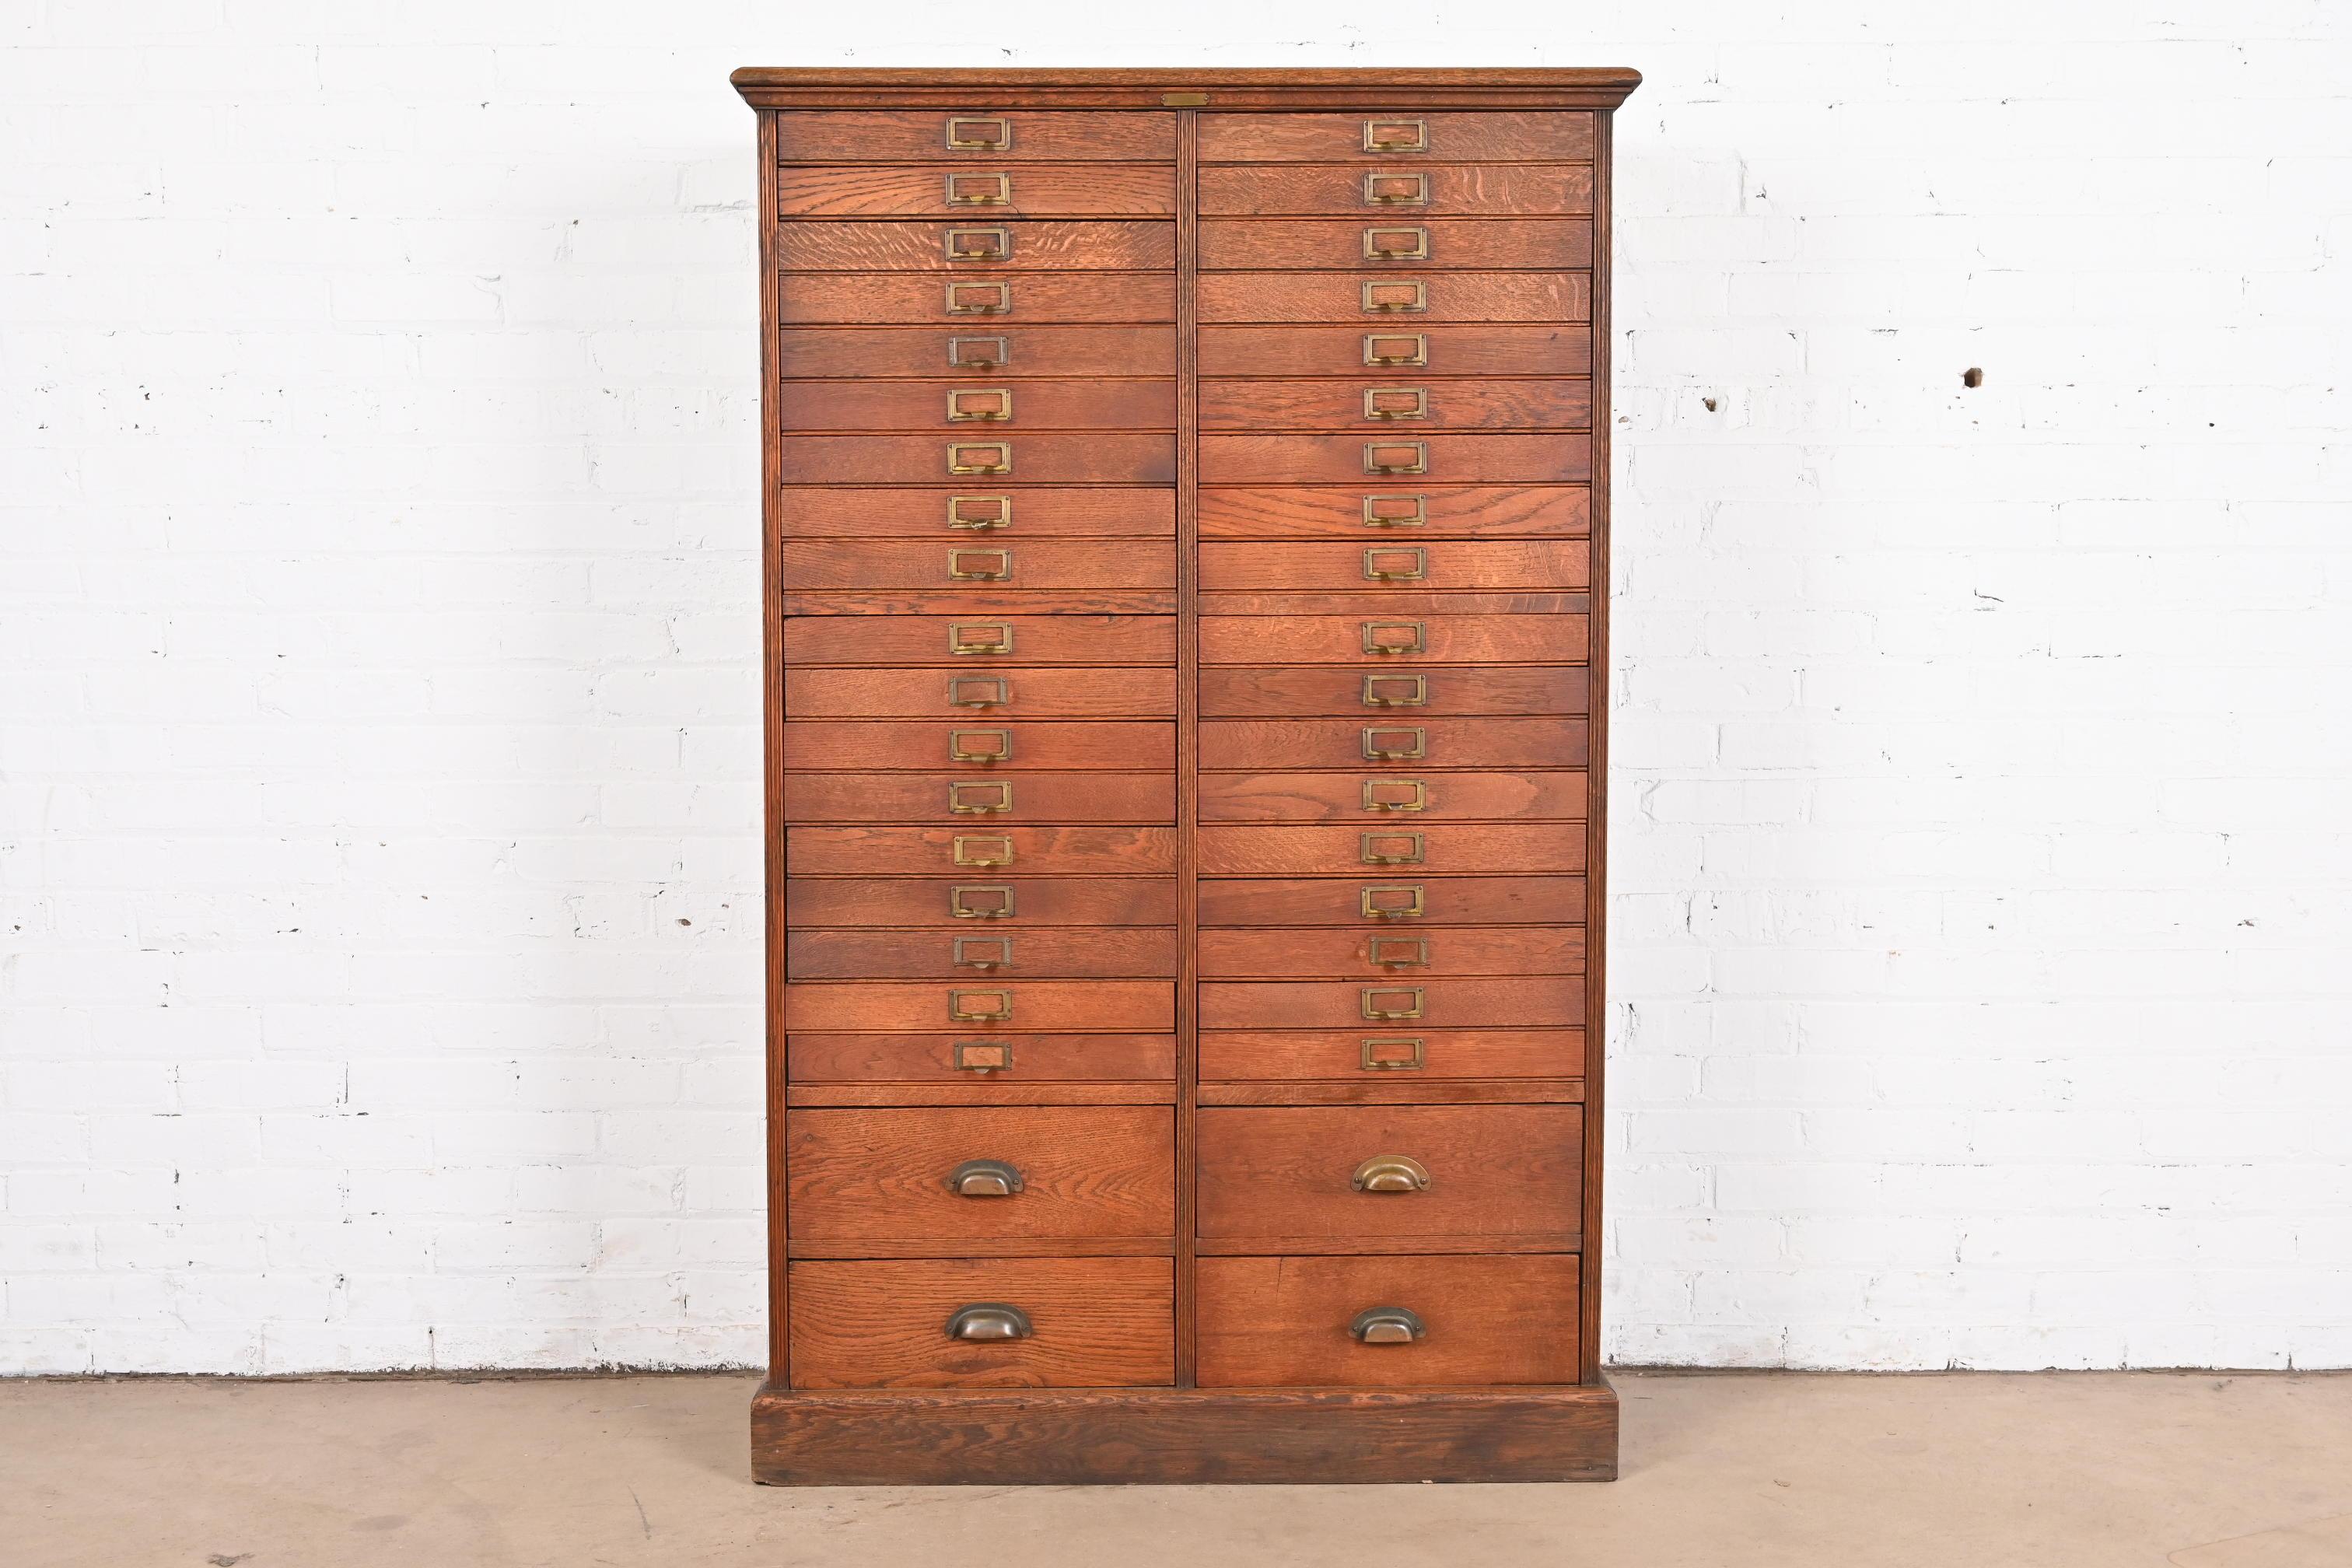 An outstanding antique Arts & Crafts 40-drawer file cabinet or chest of drawers

By The George A. Williams Co.

USA, Circa 1900

Solid quarter-sawn oak, with brass hardware.

Measures: 38.13